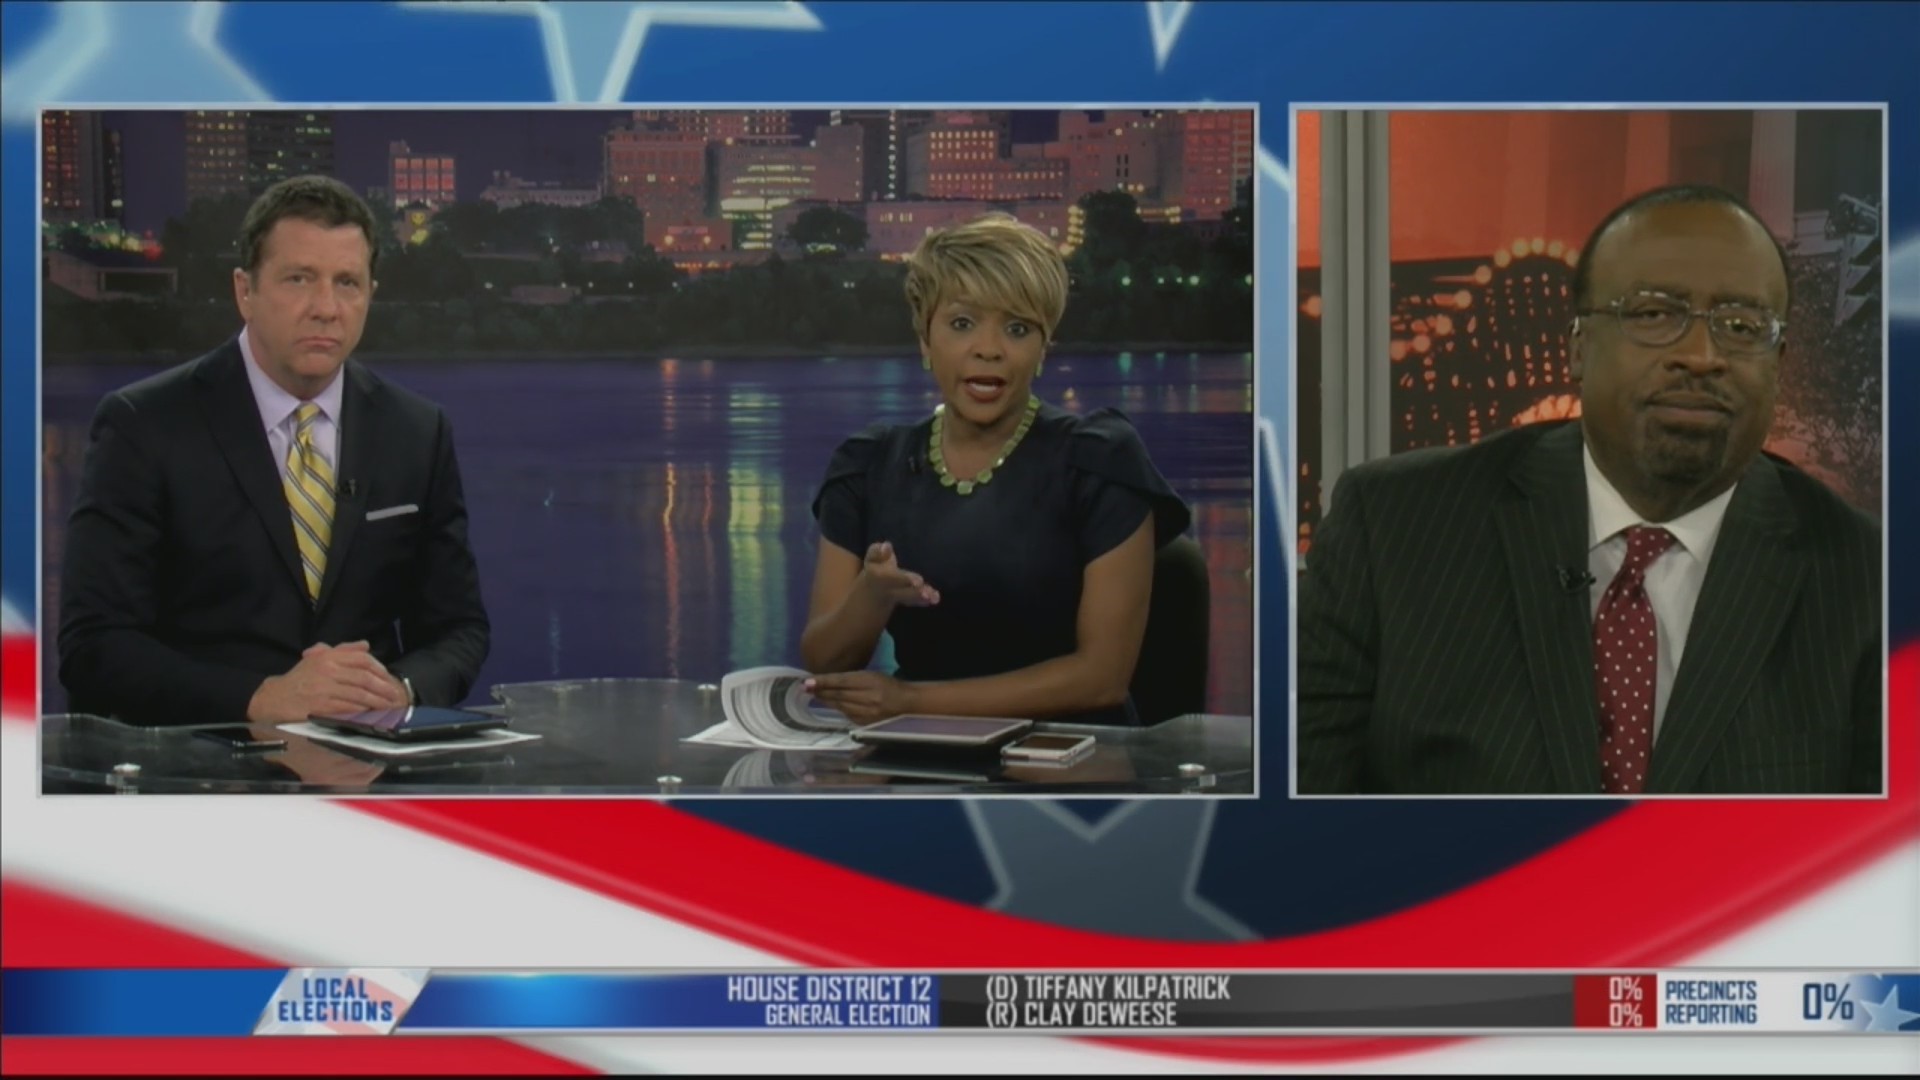 Local 24 News political analyst Otis Sanford discusses the results of the Mississippi state election